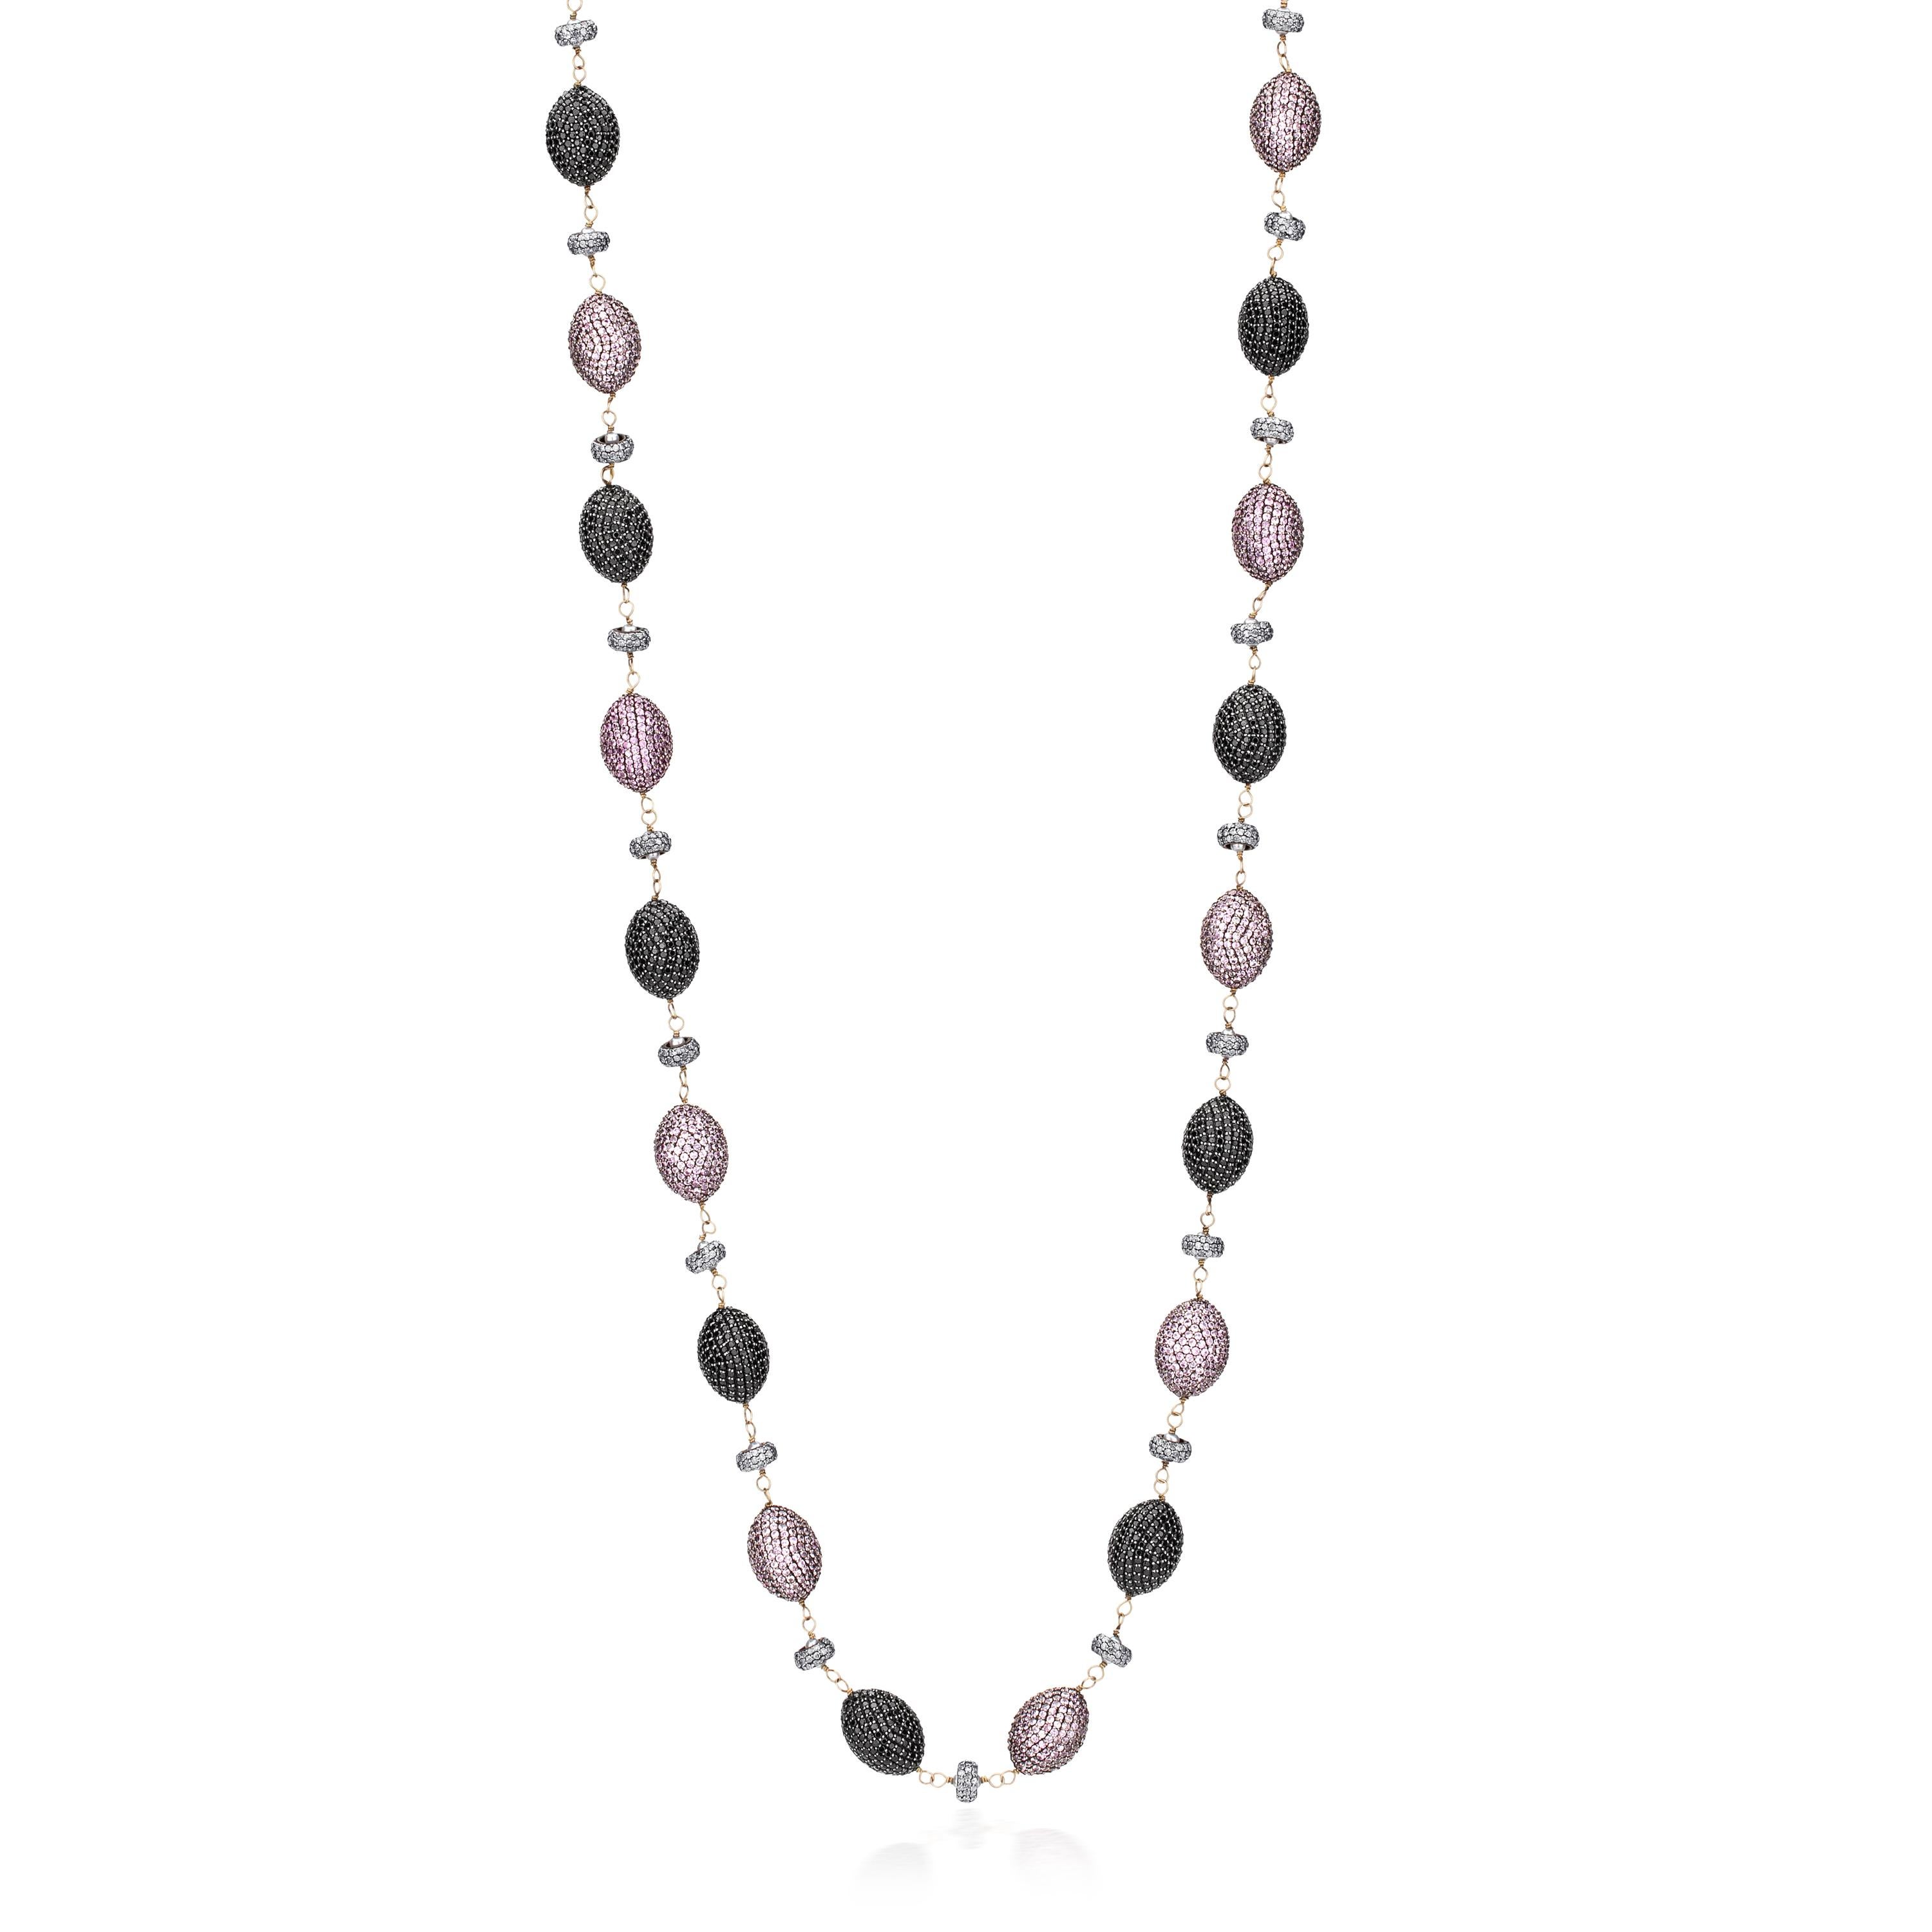 Lilac skies shine all day and night around with this fabulous Victorian station necklace crafted with oval-shaped beaded motifs of pink sapphire and black spinel alternating on a wire wrap chain. Each oval motif is separated with pearls caged in